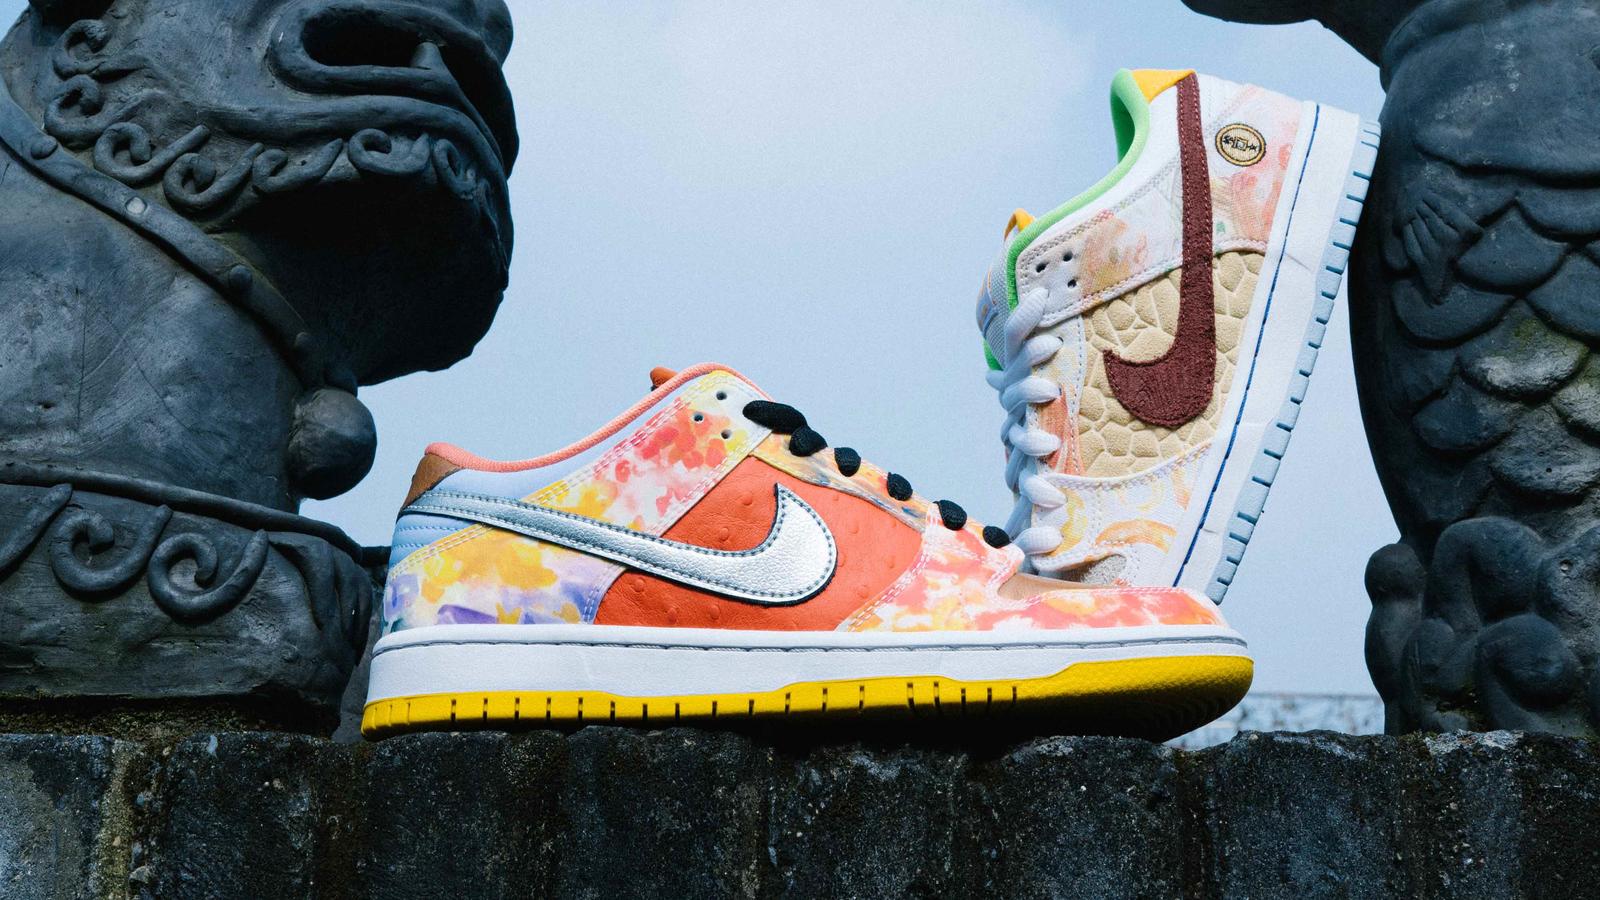 Nike Dunk Sb Lo Pro Street Hawker Official Image And Release Date